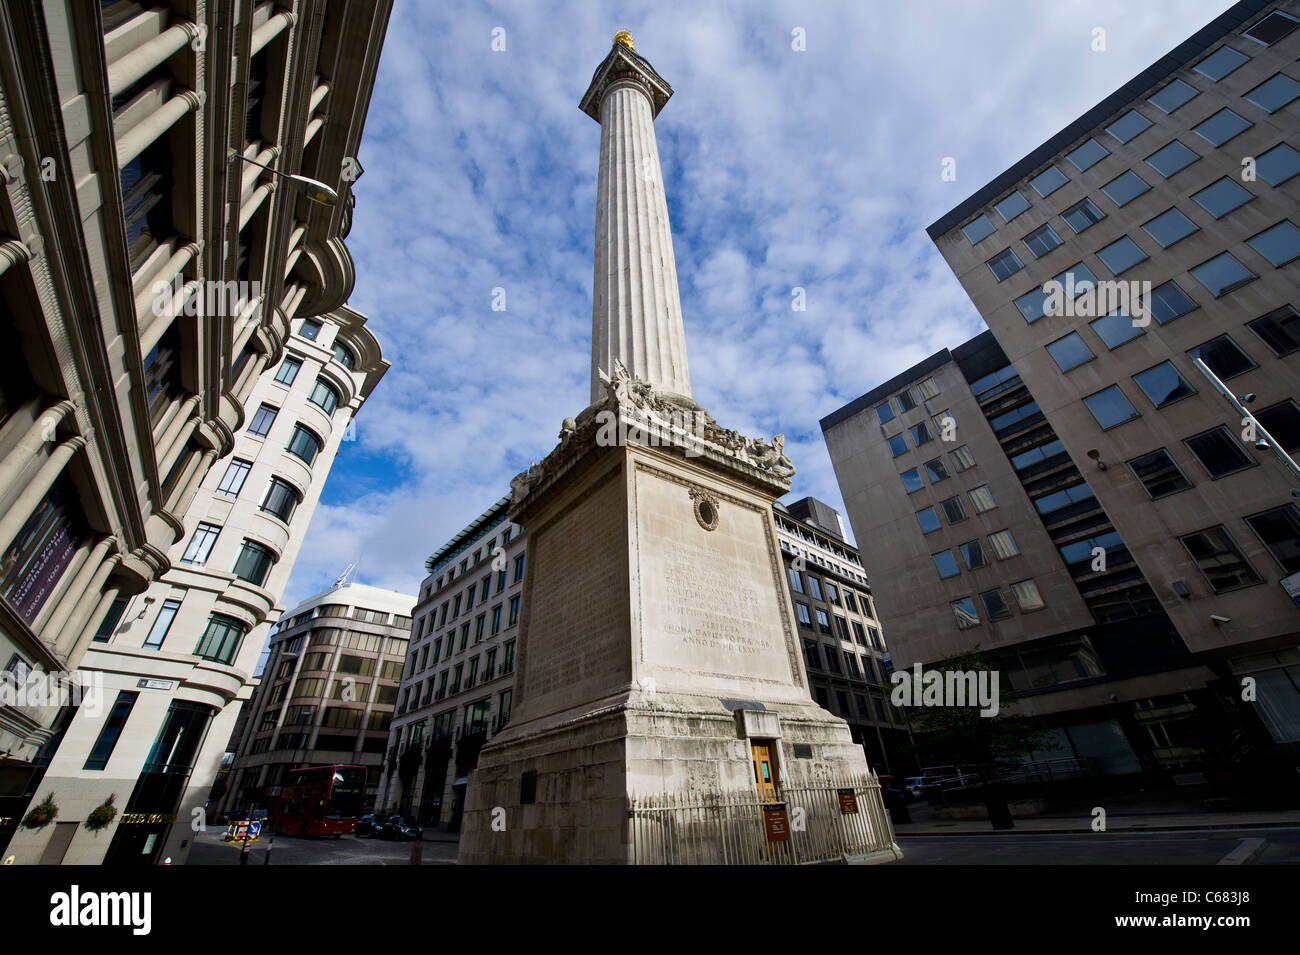 The Monument, erected near Pudding Lane where the Great fire of London in 1666 began, which is now a London tourism attraction Stock Photo